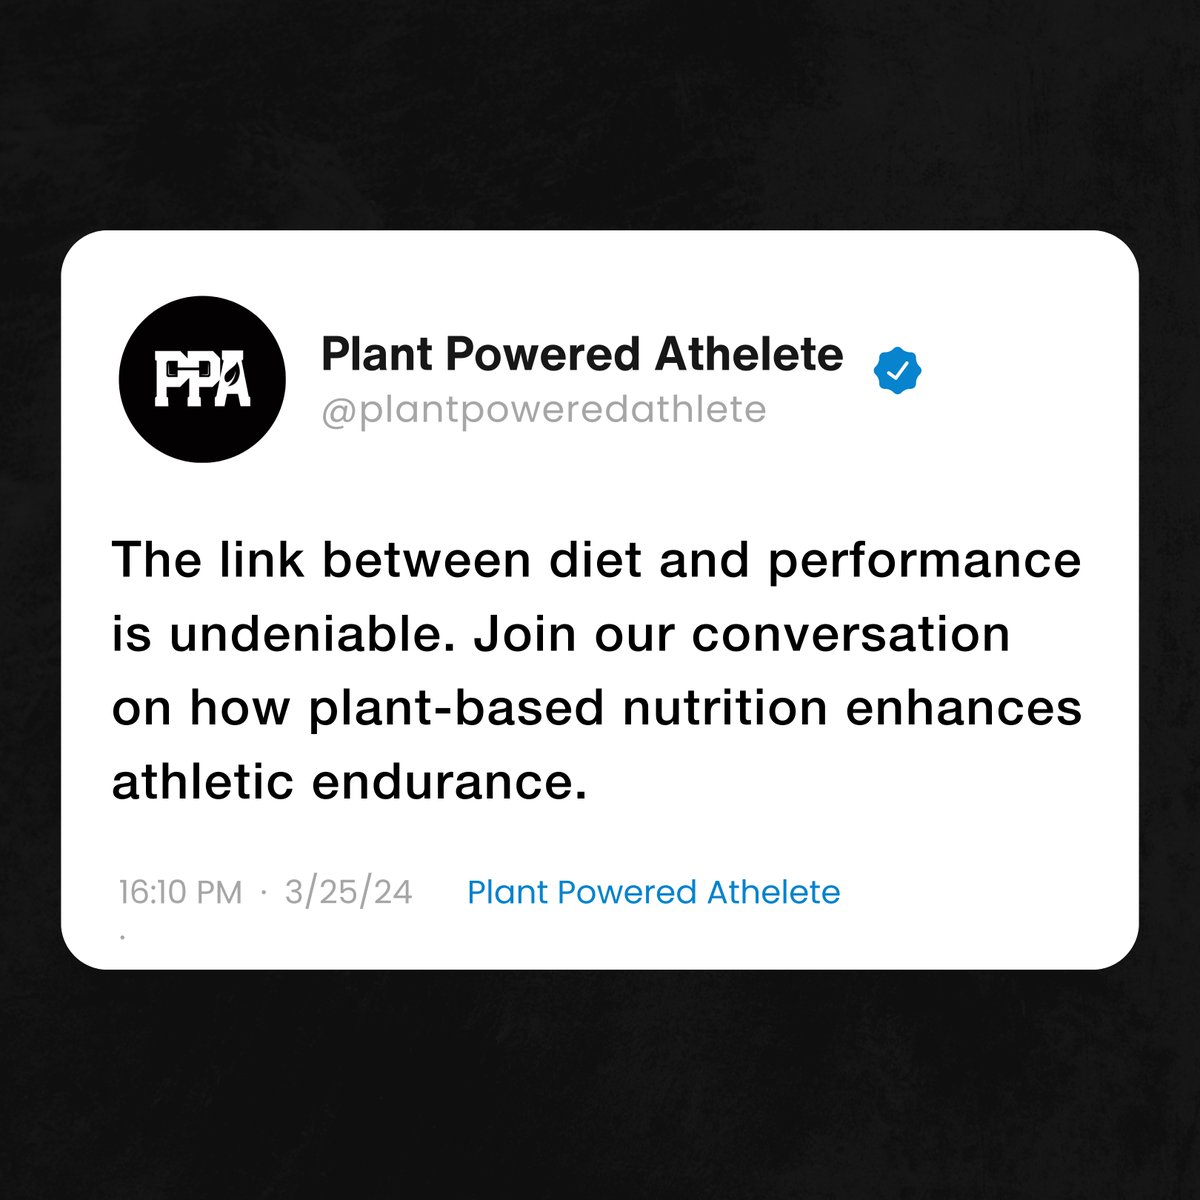 Fuel your endurance, plant your performance roots! 🌿💪 Discover the power of greens in every stride with PPA. 
.
.
.
.
#plantpoweredathlete #plantbasedprotein #plantbasedcoach #plantpowered #plantbased #plantbuilt #plantbasedfood #plantbaseddiet #veganathlete #plantbaseddiet ...